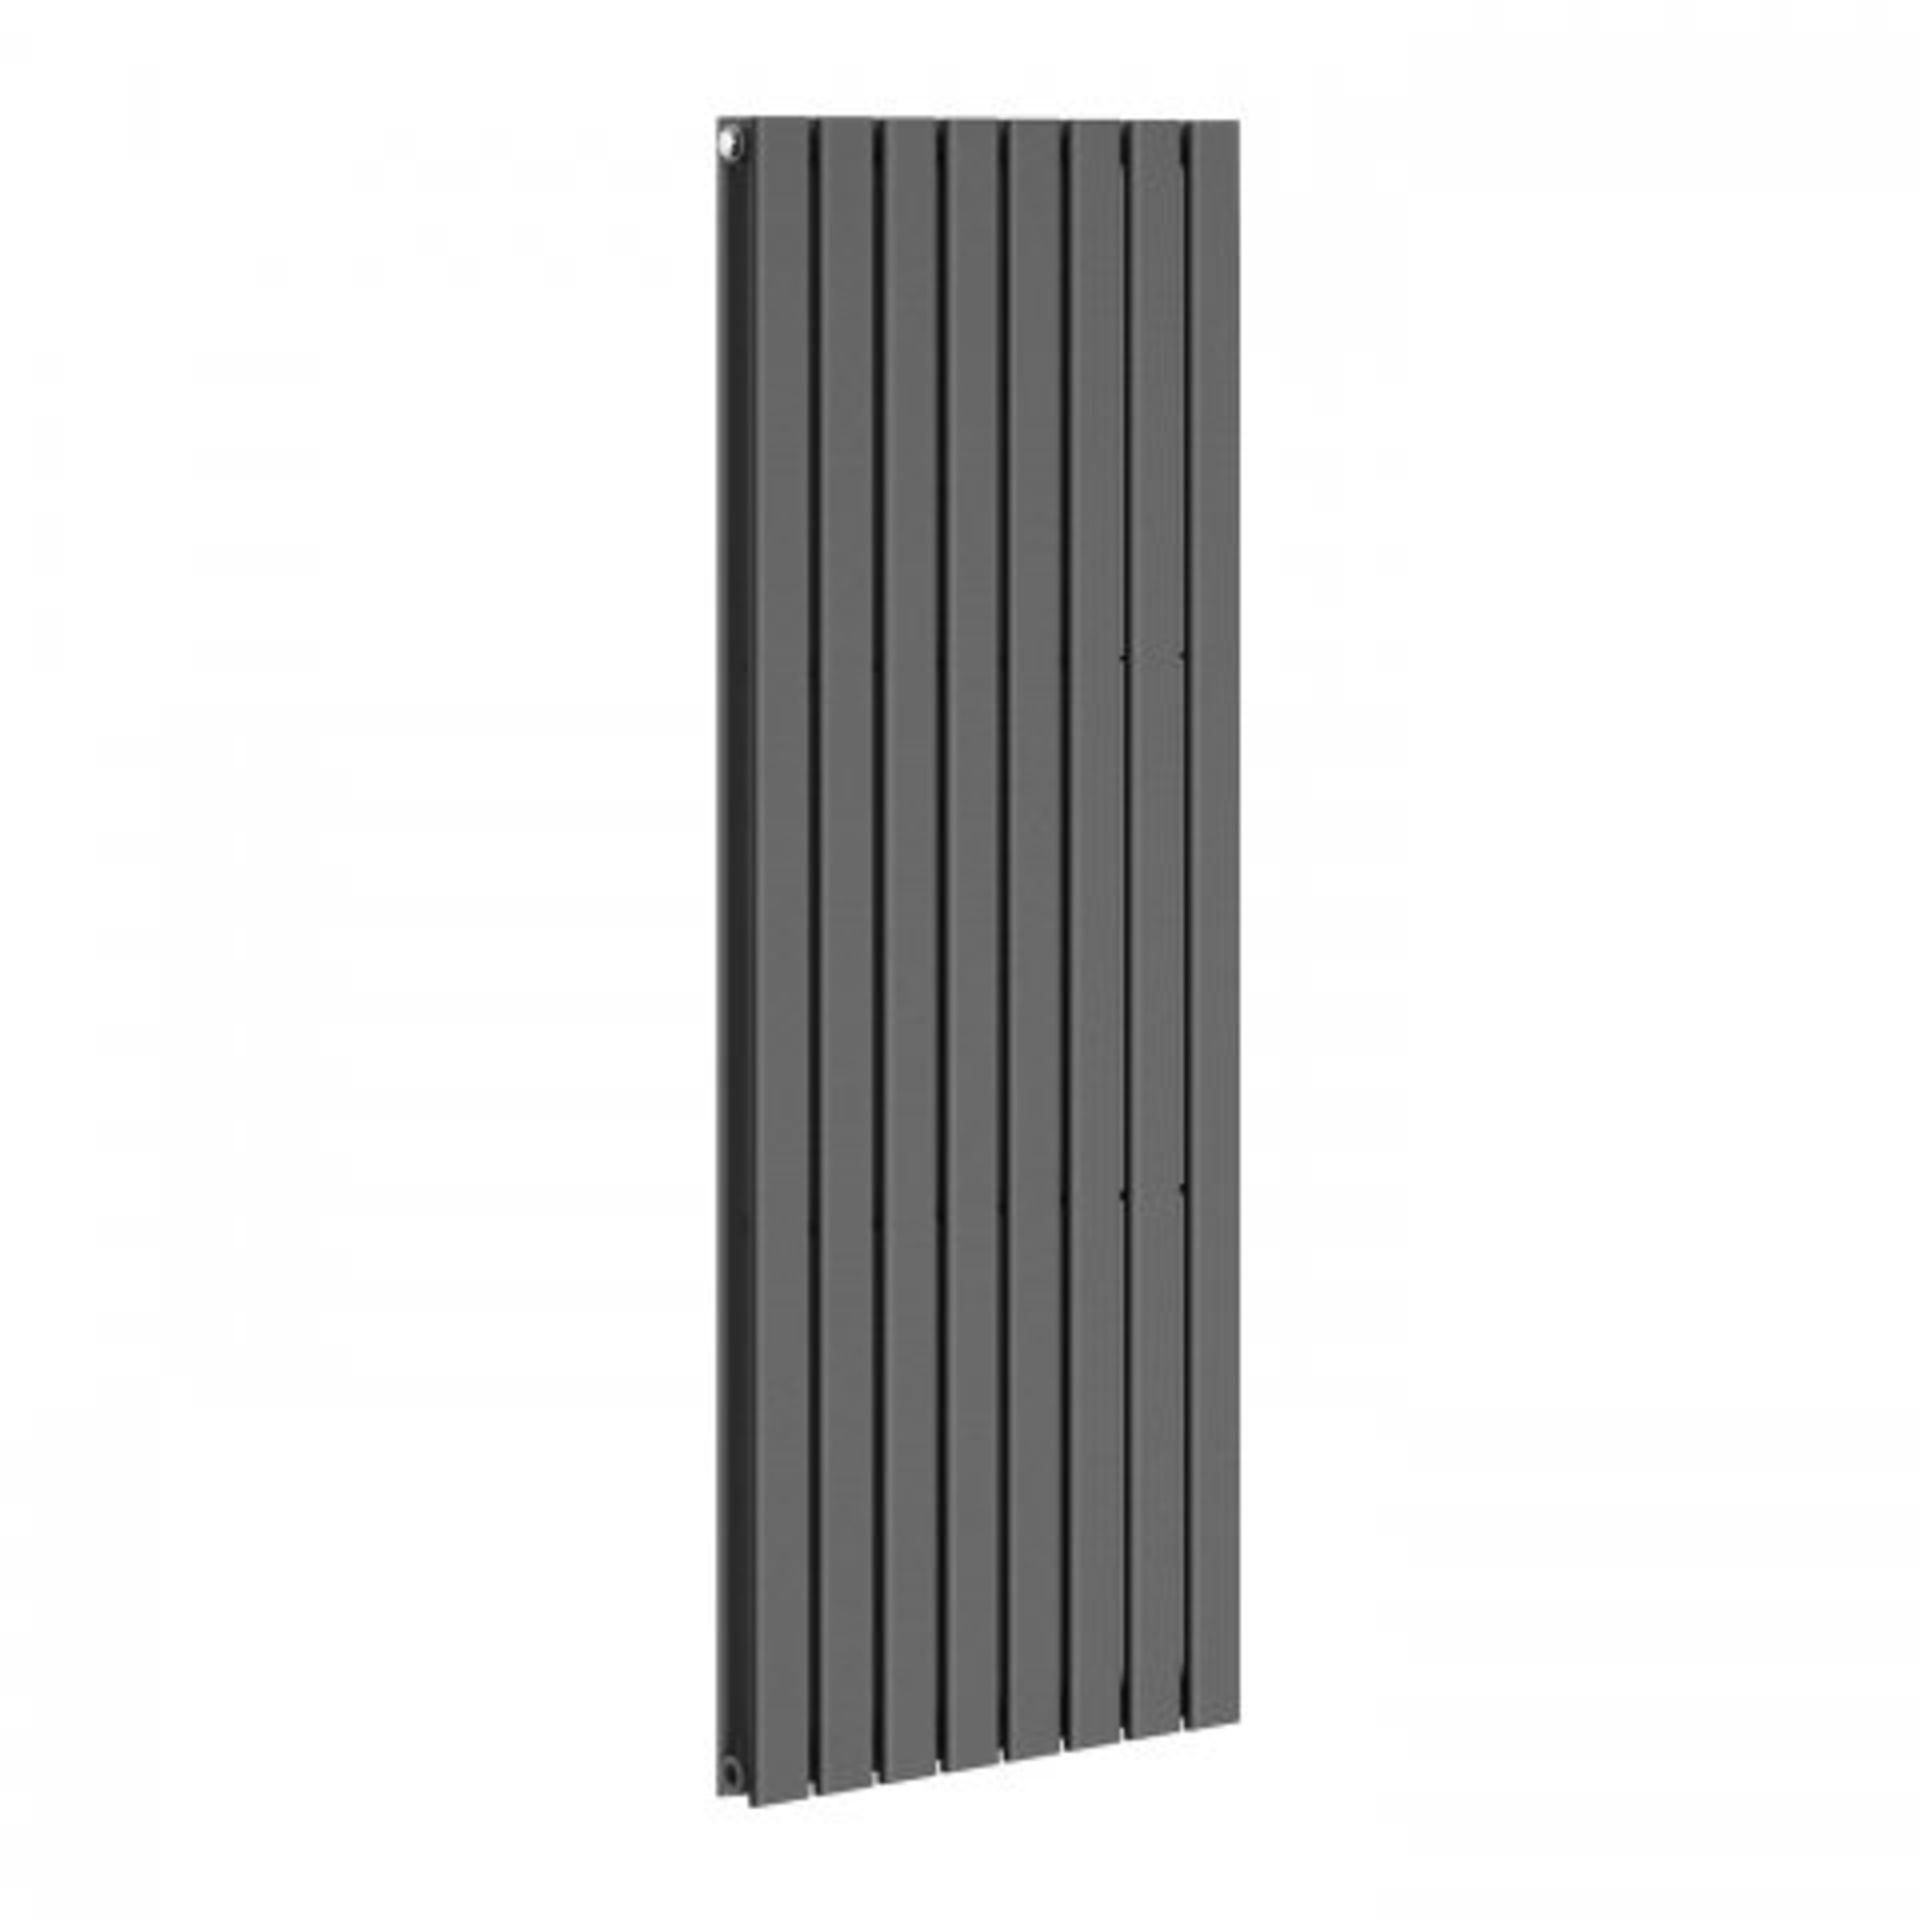 (I151) 1800x608mm Anthracite Double Flat Panel Vertical Radiator - Thera Premium. RRP £499.99. - Image 4 of 4